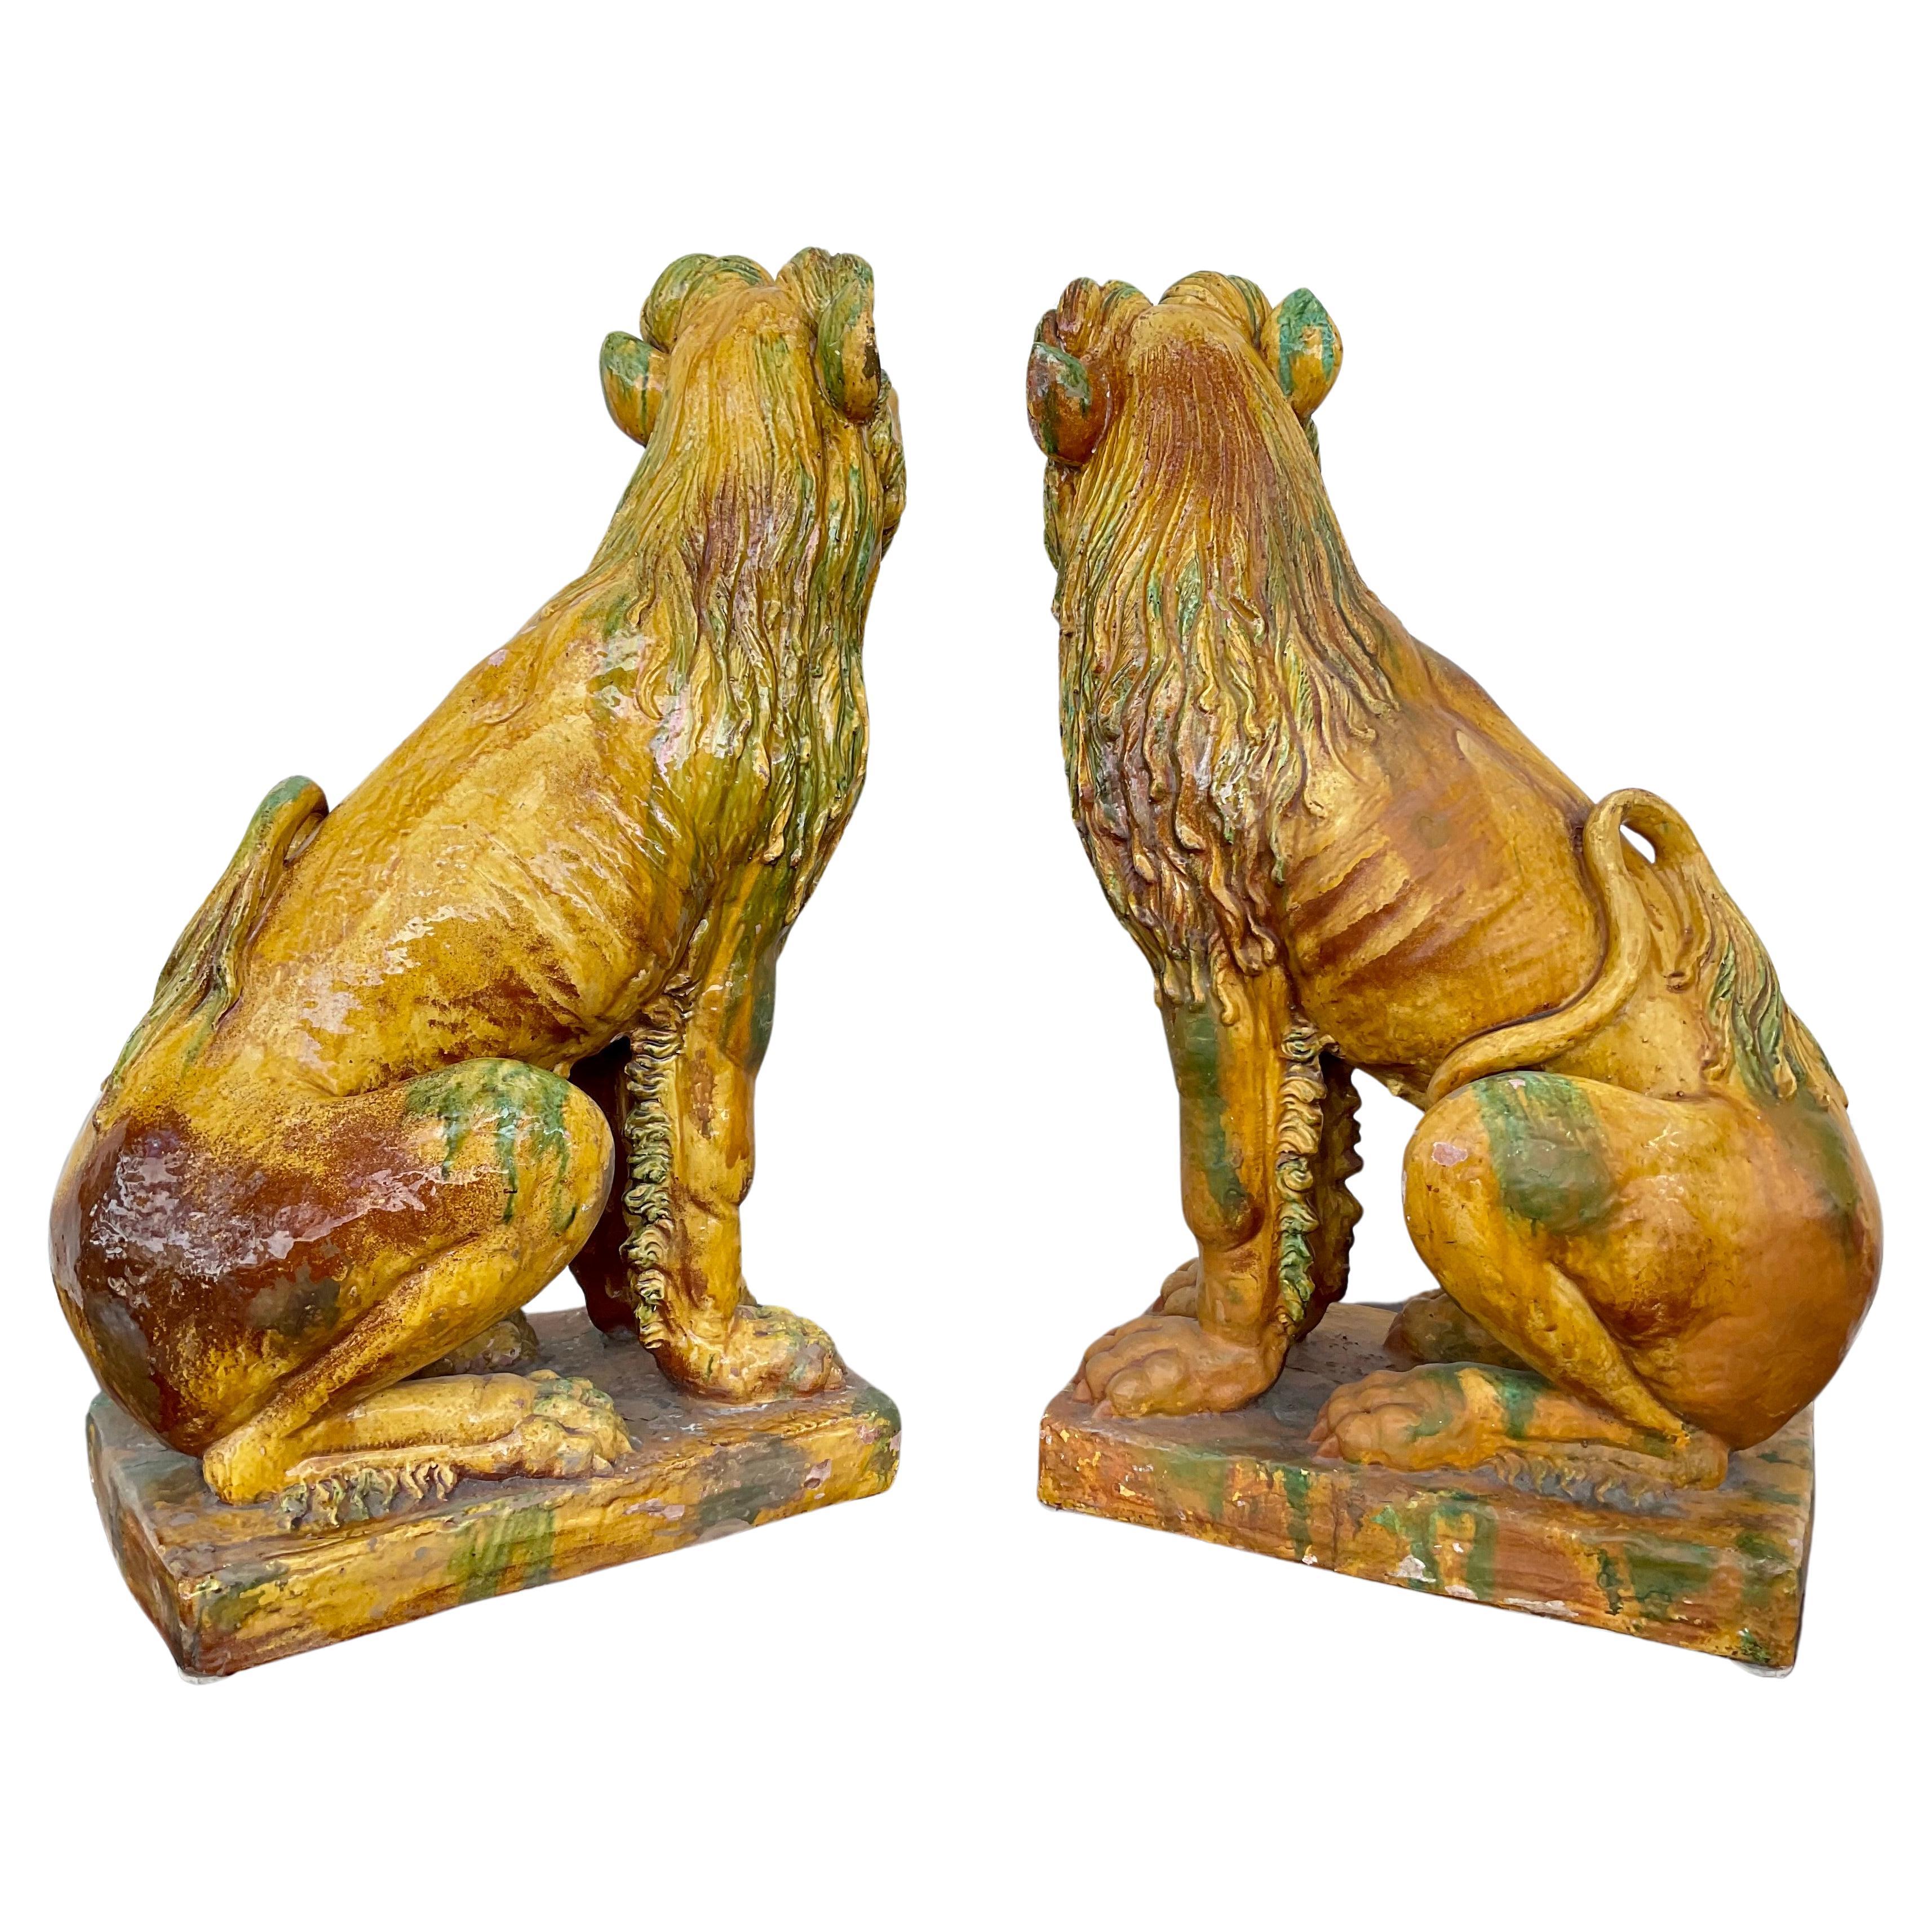 Pair of Large Glazed Terra Cotta Lions or Foo Dogs In Good Condition For Sale In Bradenton, FL